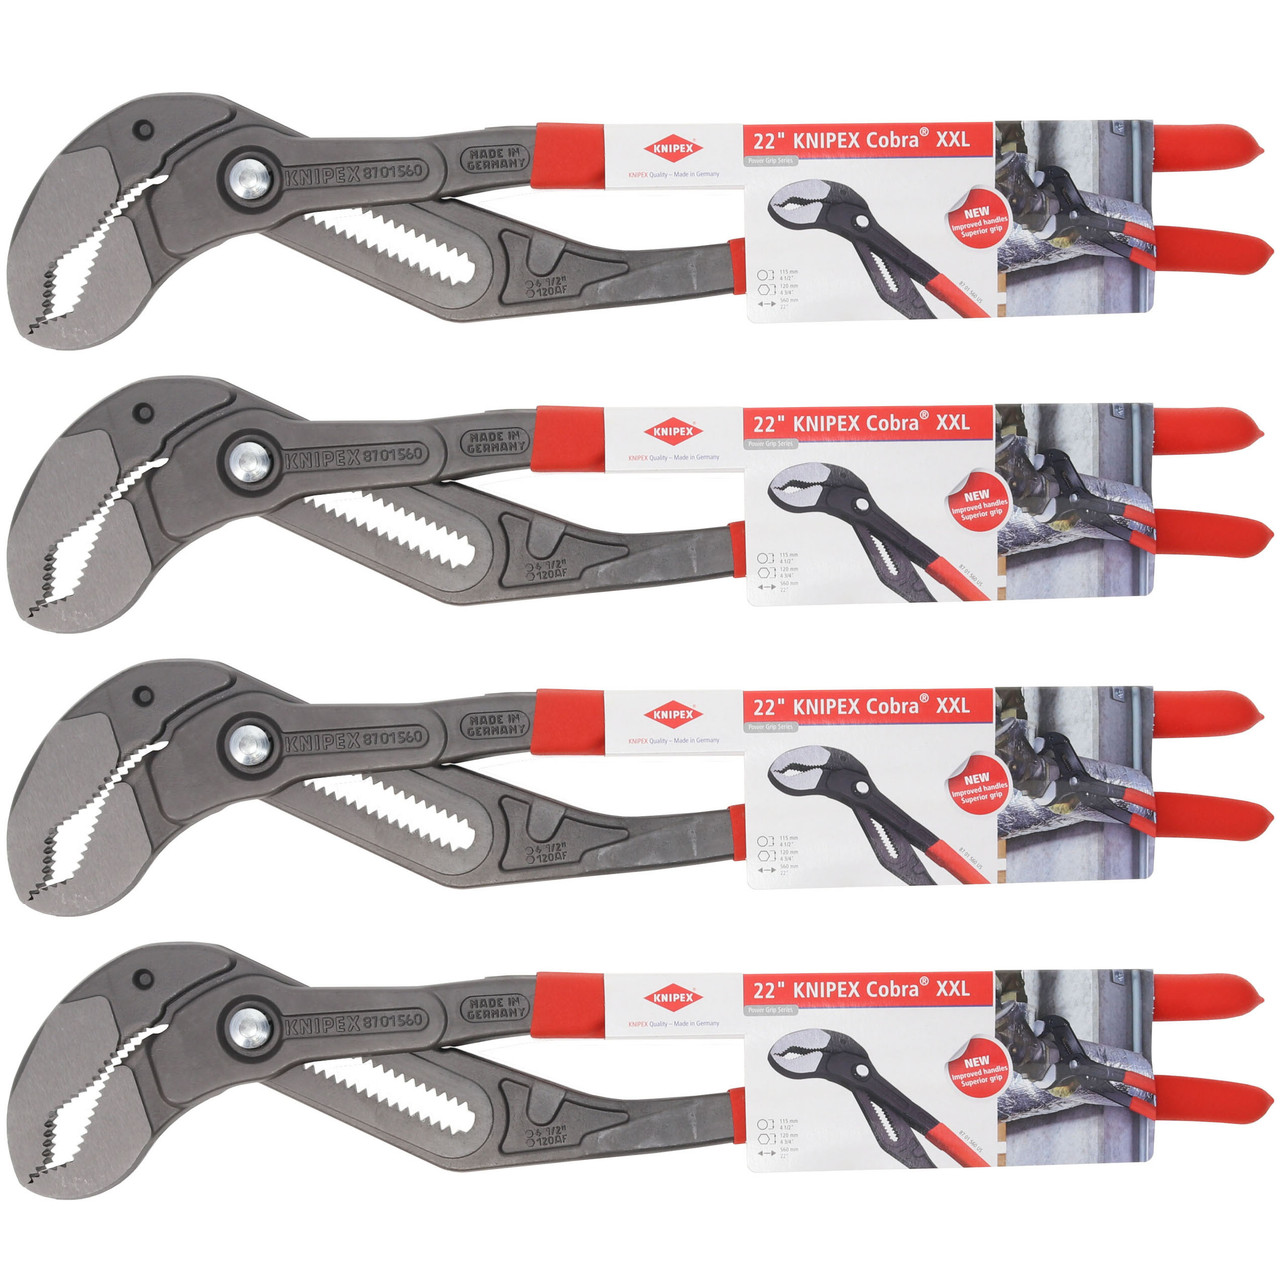 Knipex 87 01 560 US 22in Cobra XXL Water Pump Pliers - 4-Pack | Helton Tool  & Home